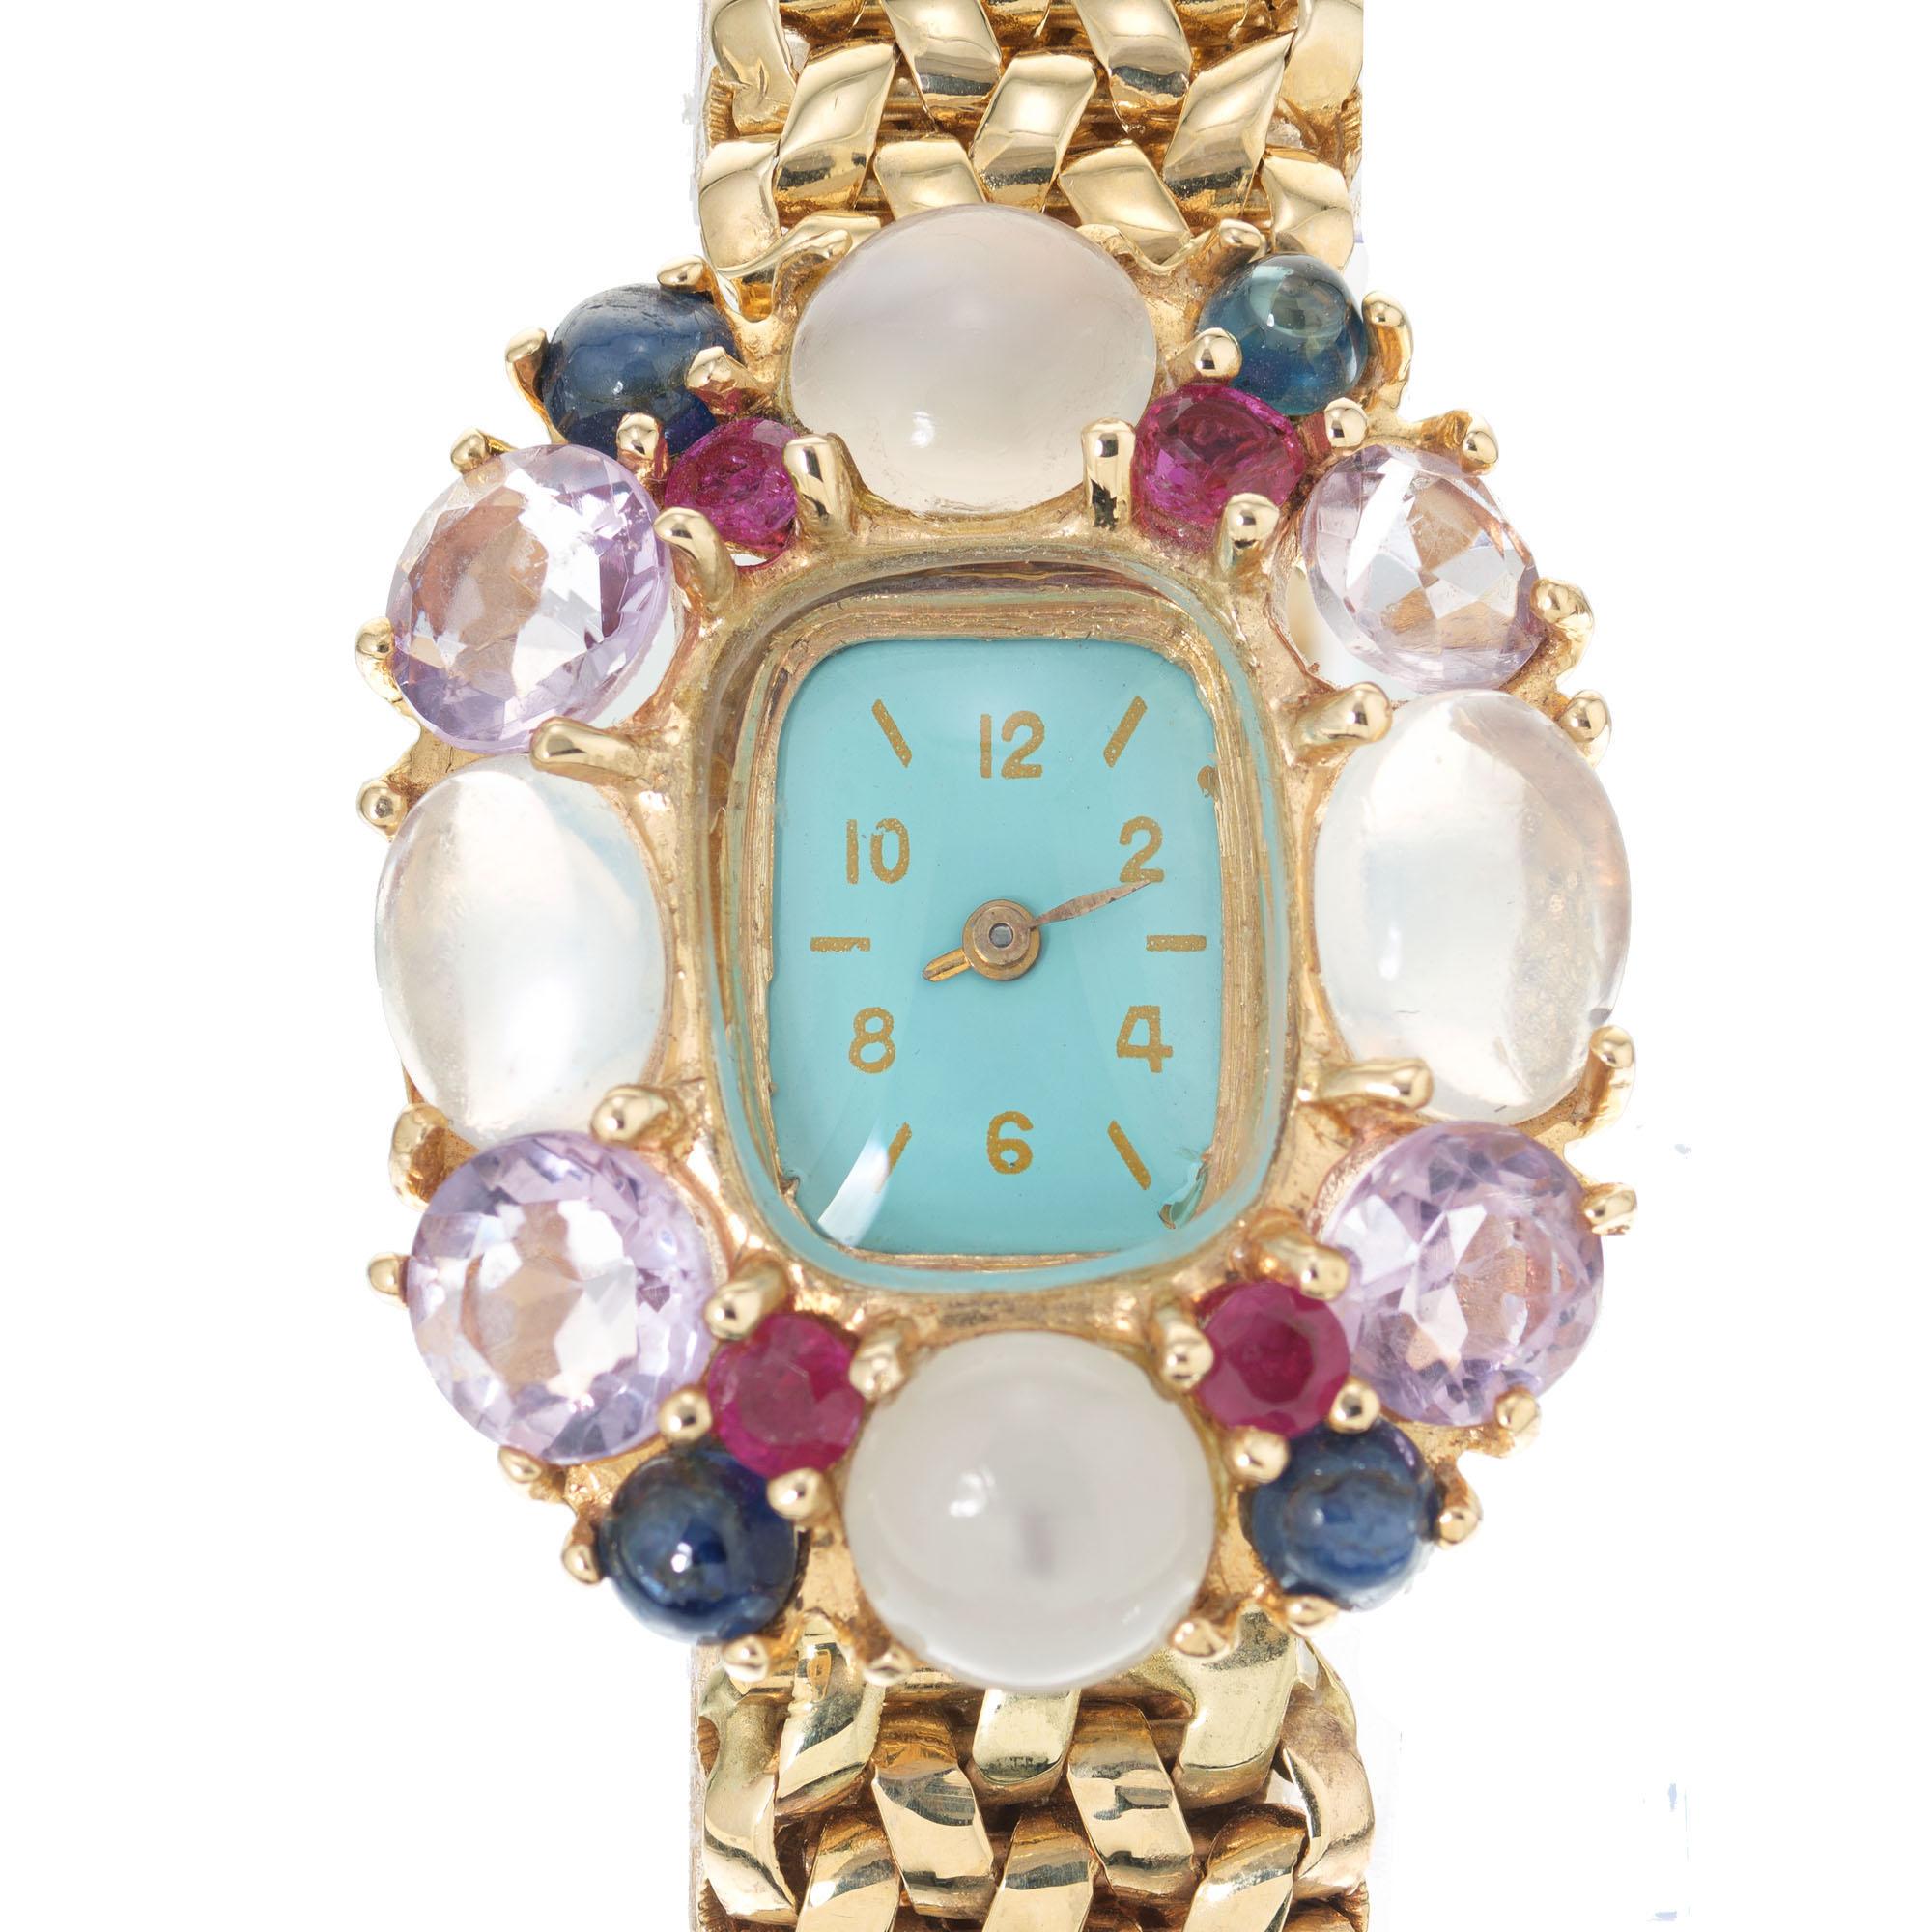 Mid-Century Lady's 14k yellow gold watch with a halo of natural stones, ruby, sapphire, amethyst and moonstone, with a 17-jewel manual-wind movement and solid gold mesh Kreisler bracelet. Turquoise blue dial, possibly refinished. 7.25 inches in